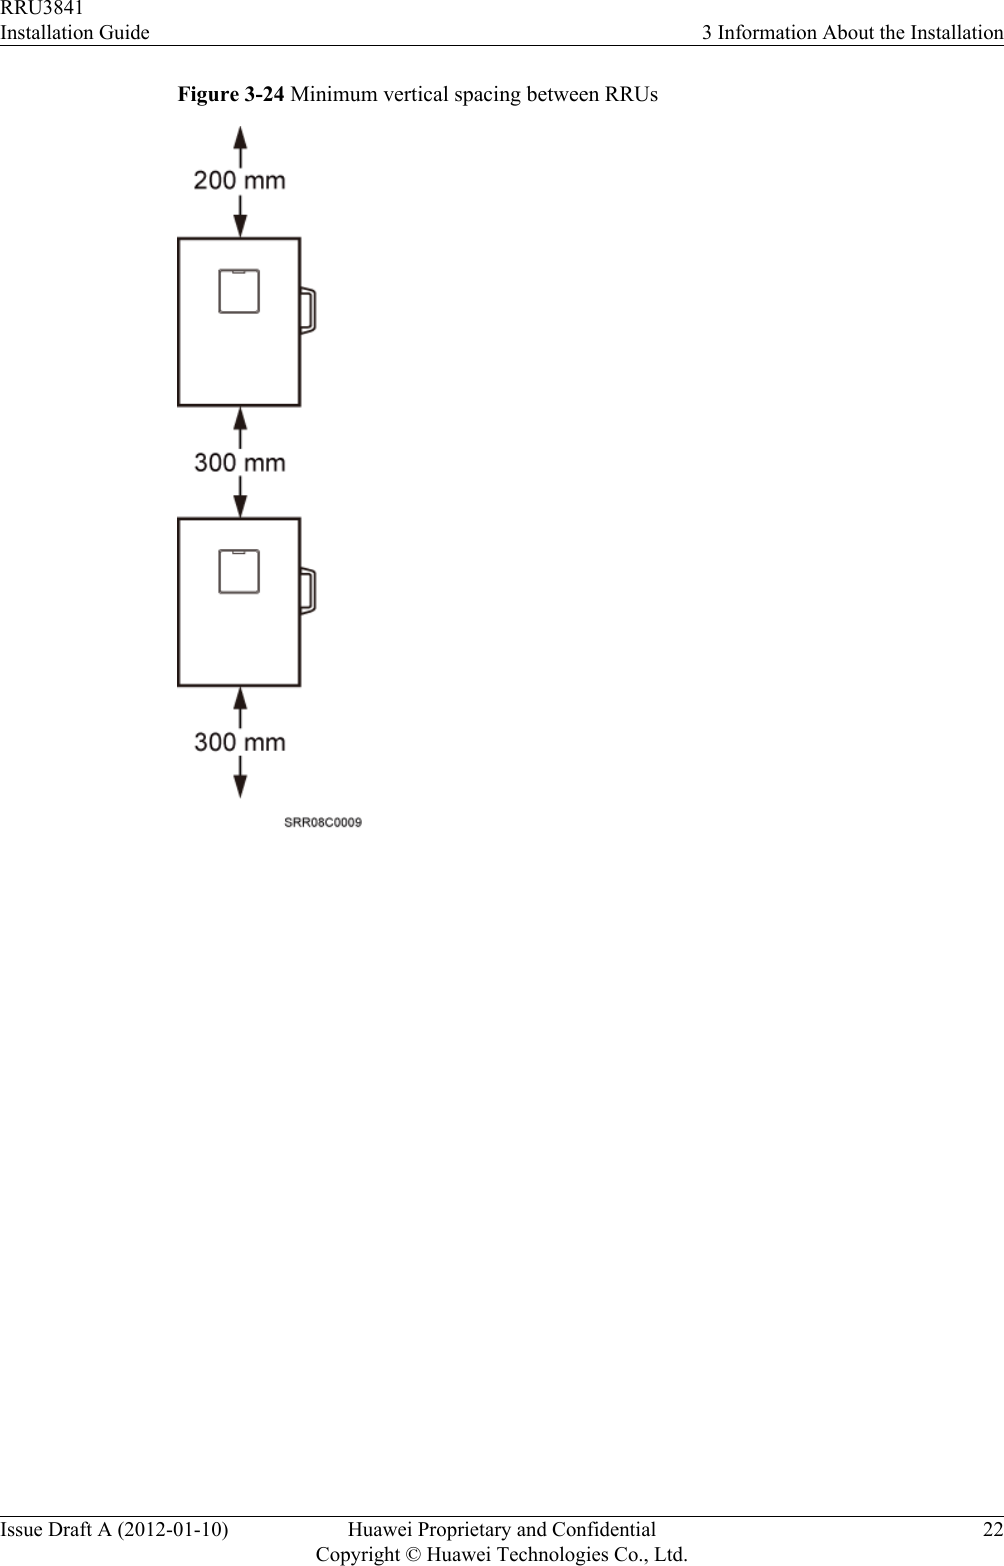 Figure 3-24 Minimum vertical spacing between RRUsRRU3841Installation Guide 3 Information About the InstallationIssue Draft A (2012-01-10) Huawei Proprietary and ConfidentialCopyright © Huawei Technologies Co., Ltd.22